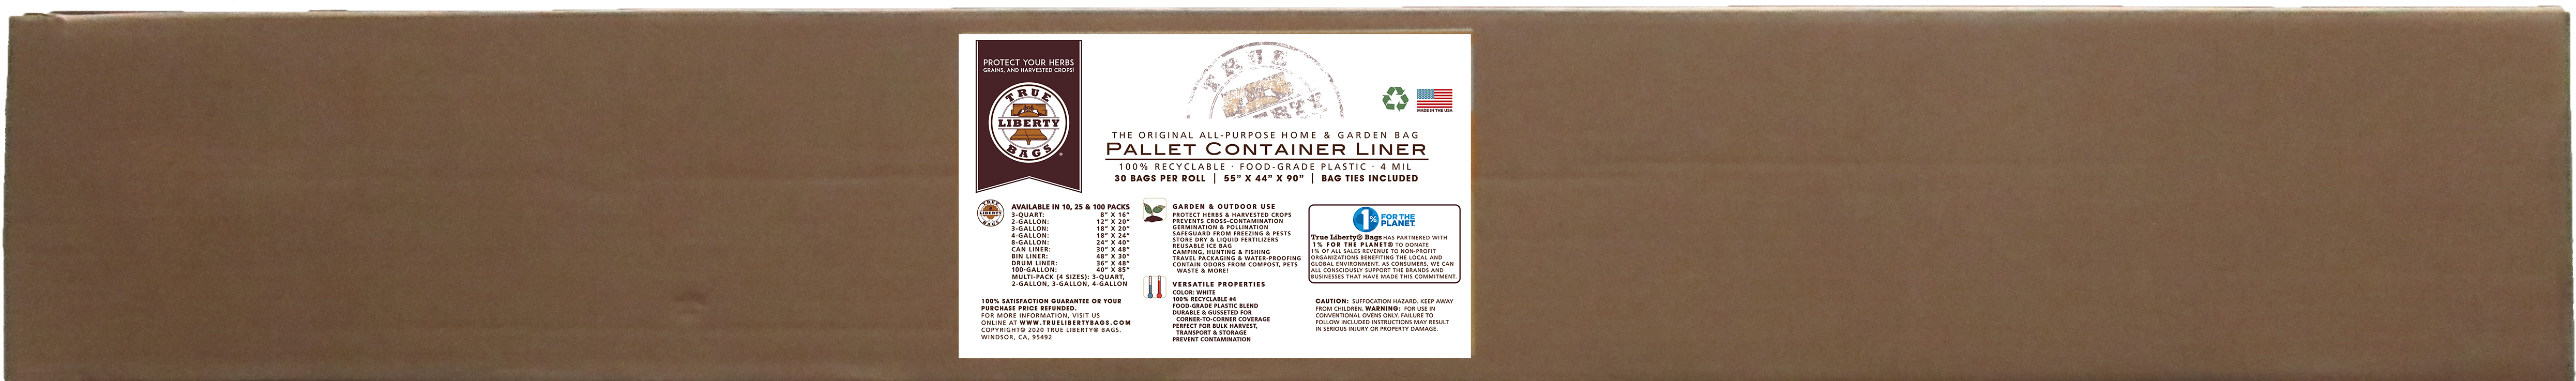 Picture for True Liberty Pallet Container Liner 55" x 44" x 90", 30 Bags/Roll, White